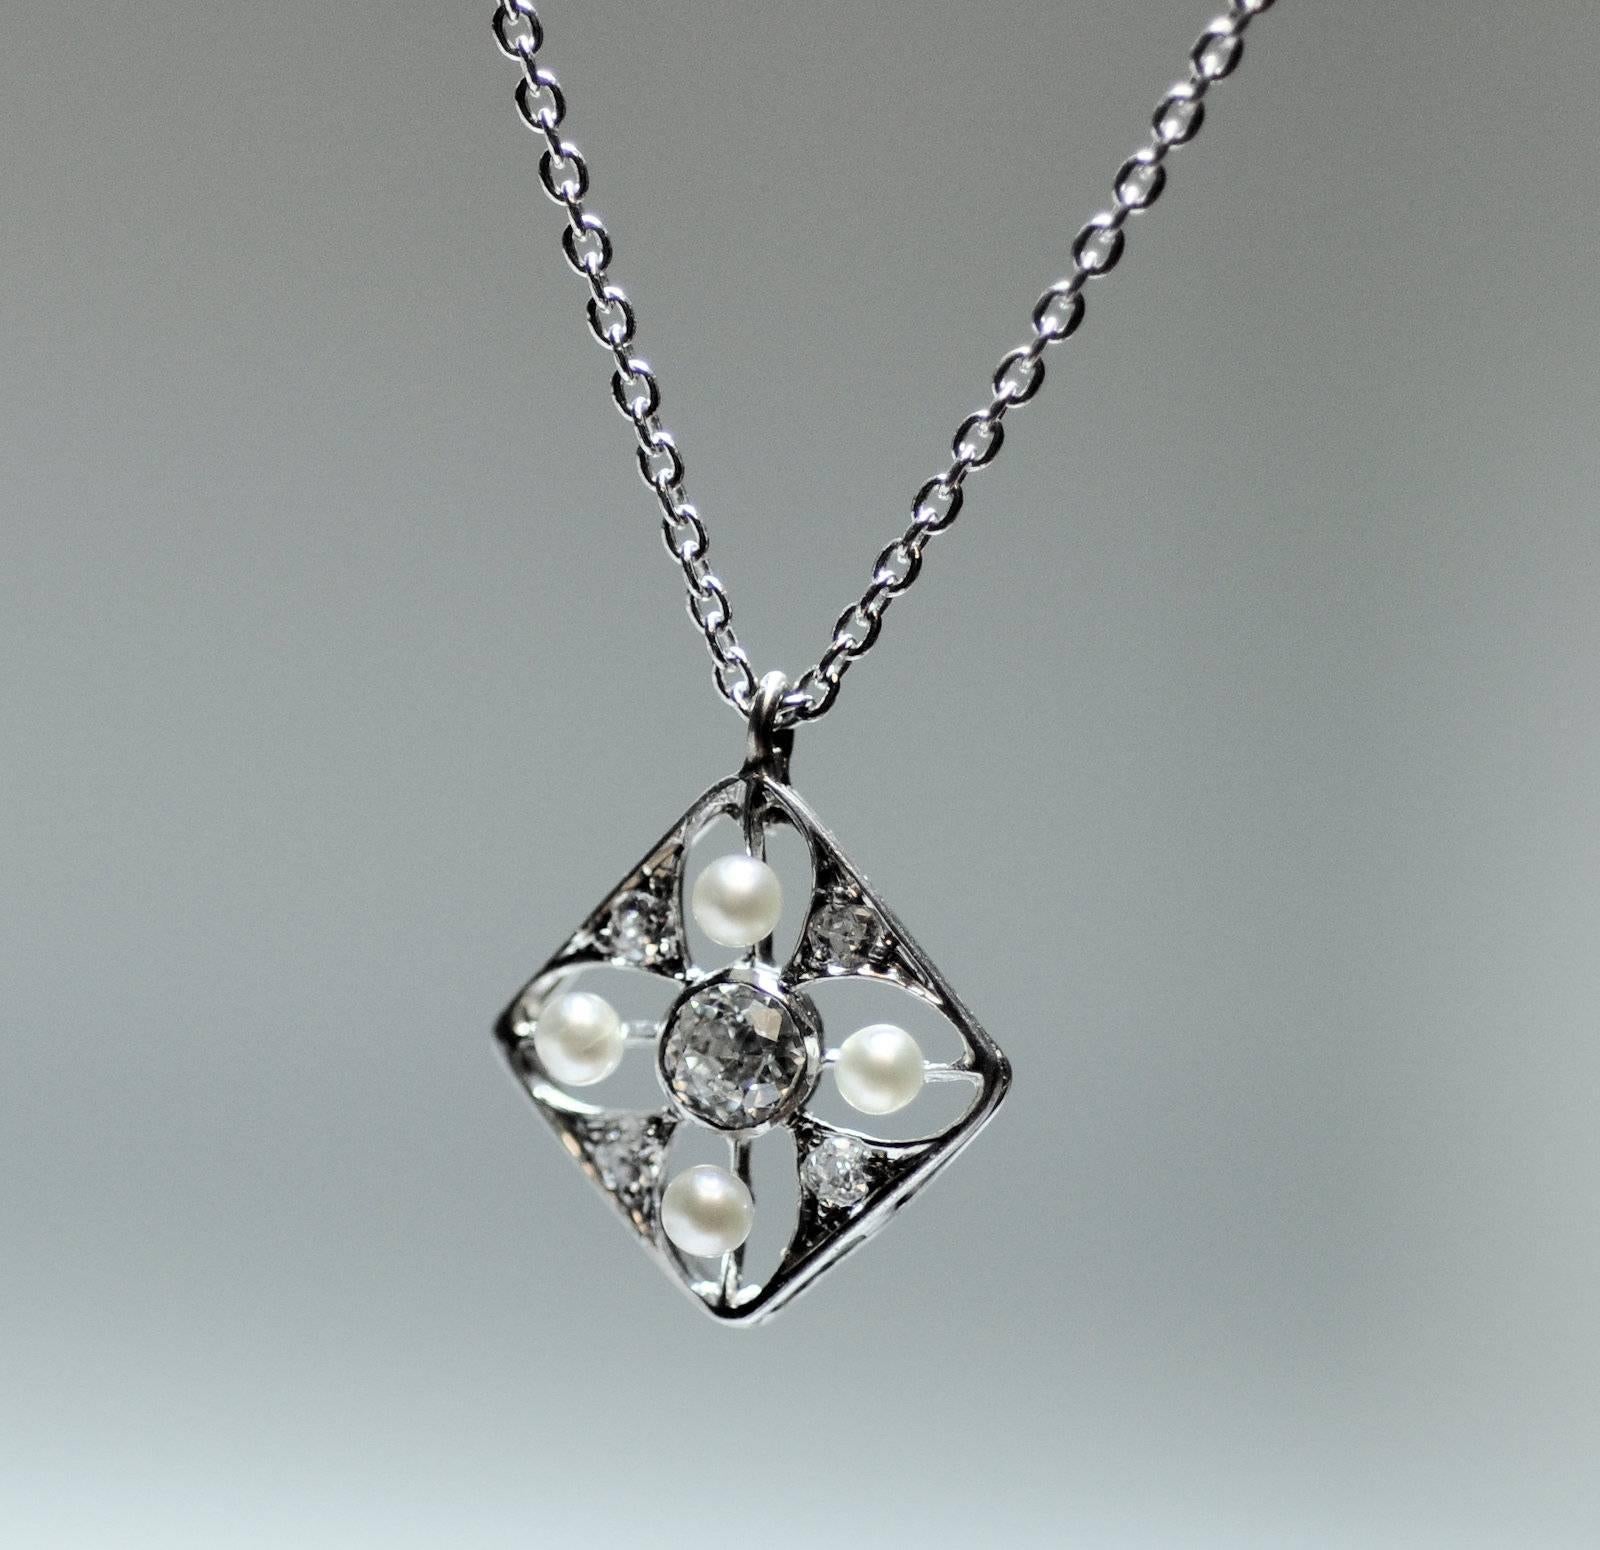 A sweet pendant made of platinum and set with five Old Mine cut diamonds 
 .22 Carat total weight of grade SI, G.  There are four seed pearls measuring 2 mm. each.  14K white gold cable chain 18 inches.  1.9 dwt.  Chain is new. 